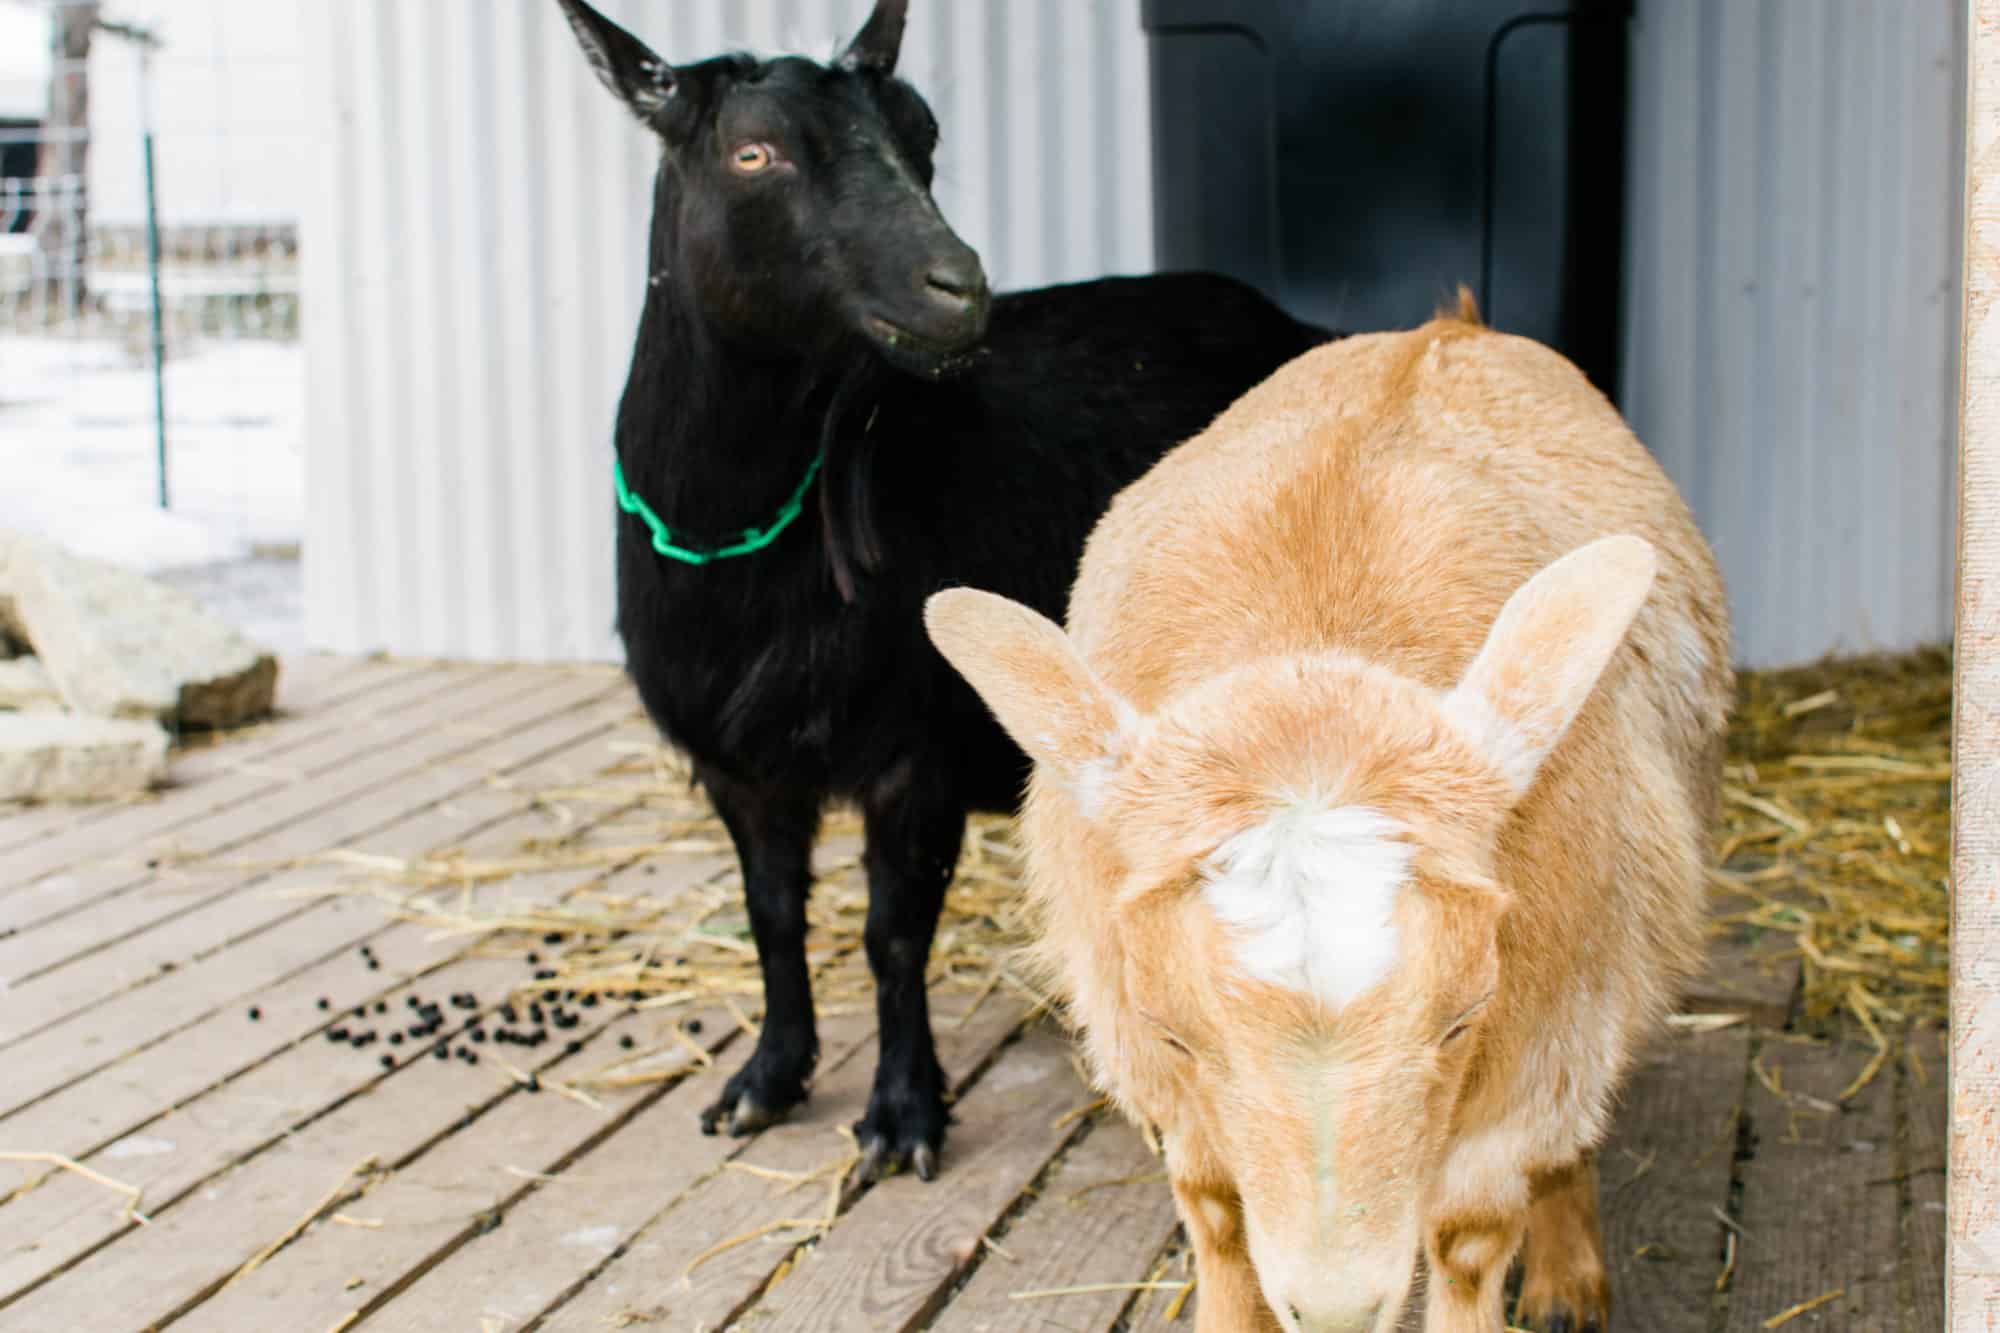 Frenchie Farm Goat kidding supplies & putting together a goat kidding kit